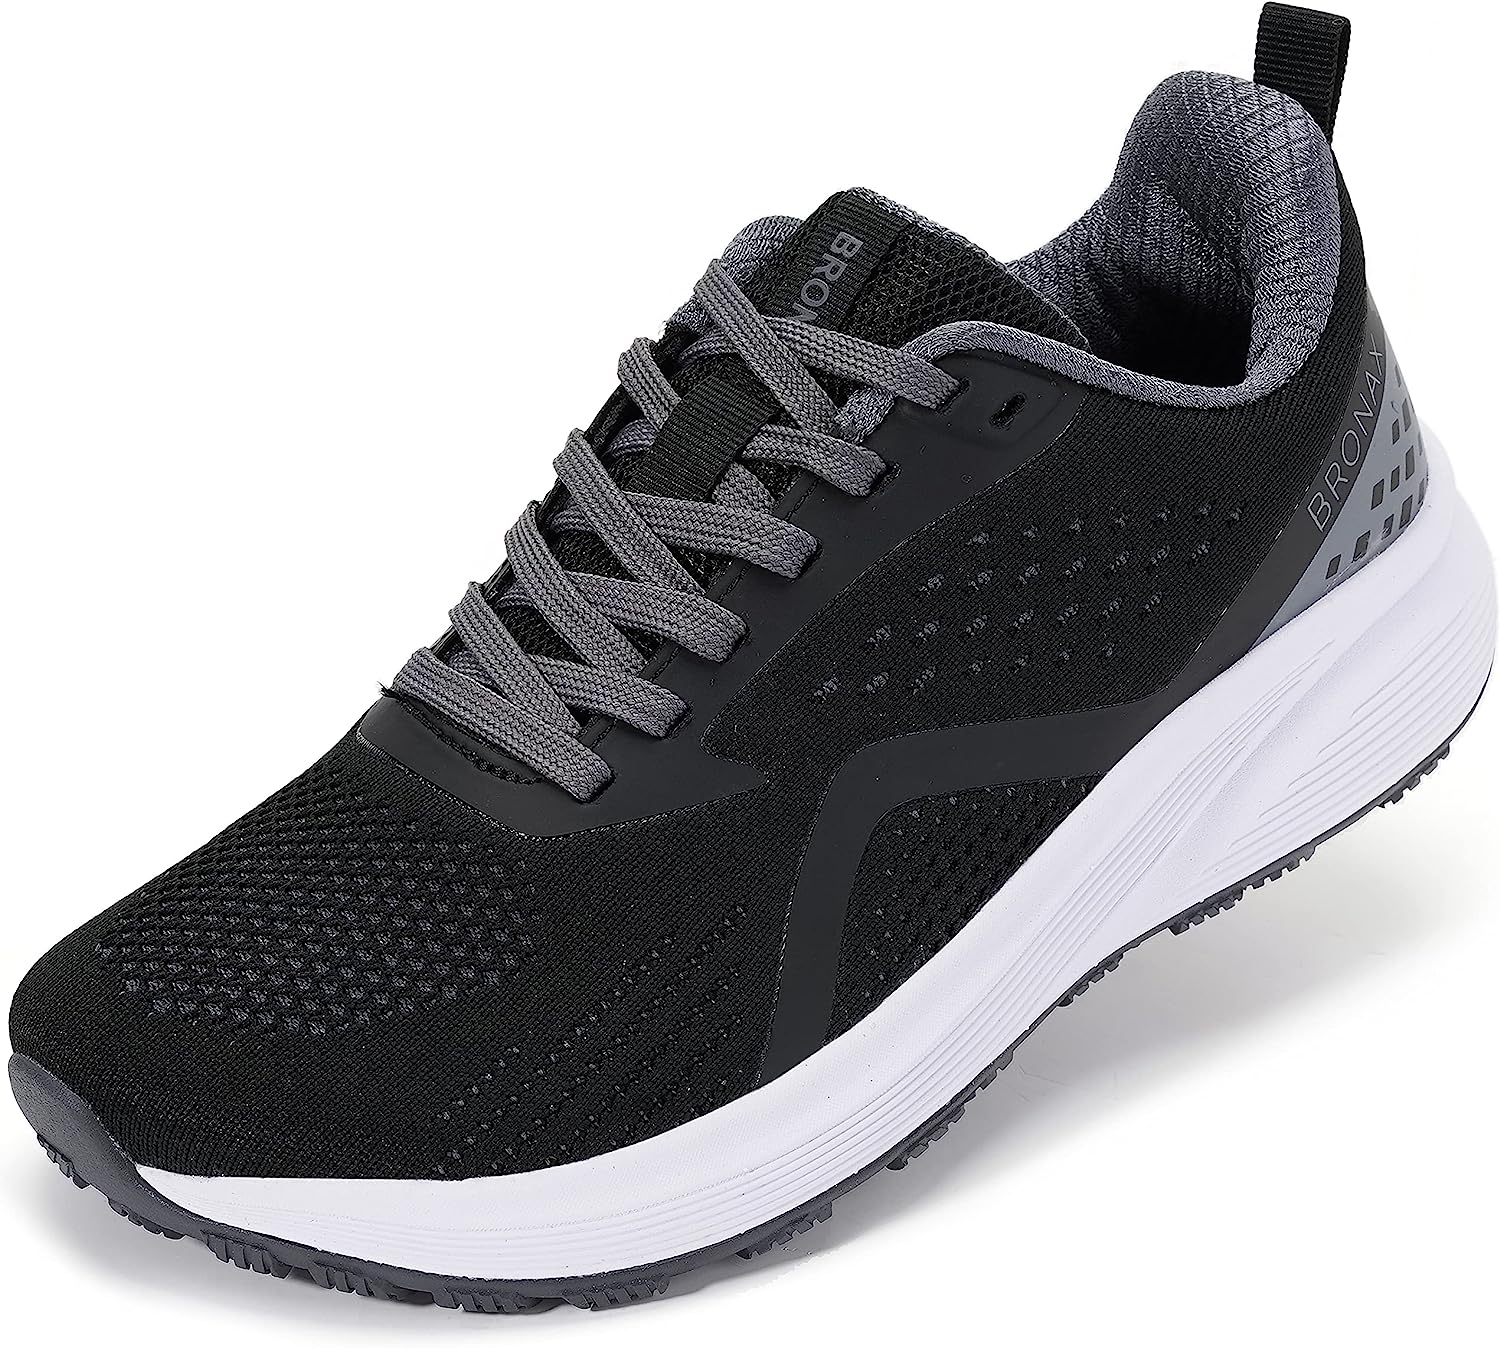 BRONAX Women's Wide Toe Box Road Running Shoes | Wide [...]